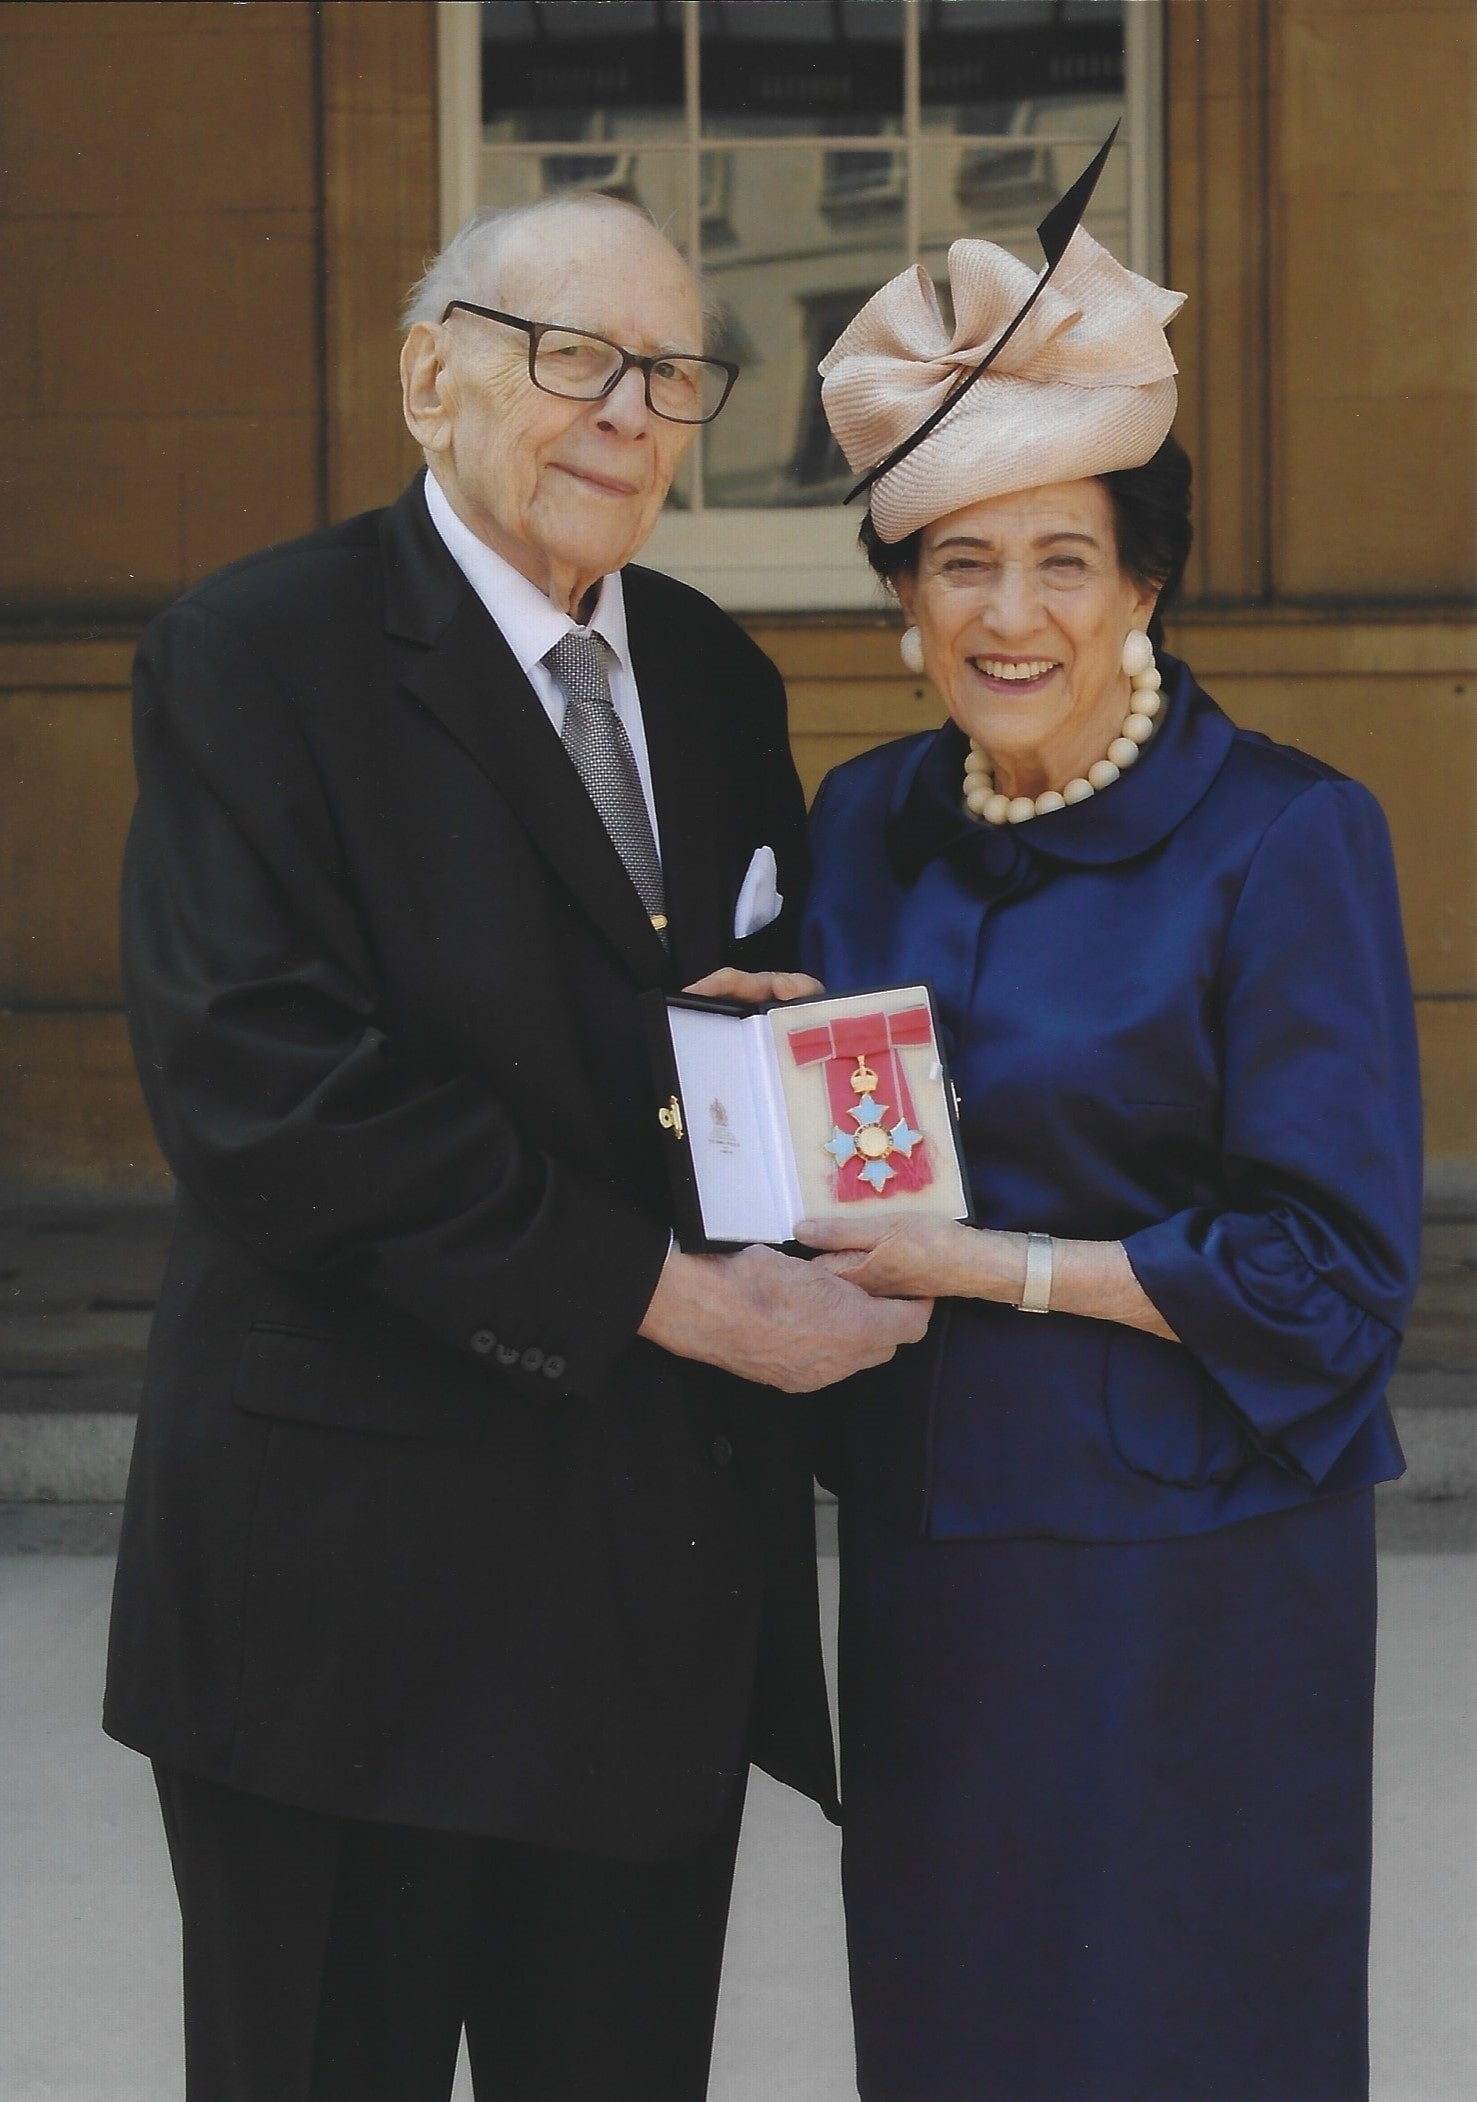 Lilian and Victor Hochhauser after the Investiture